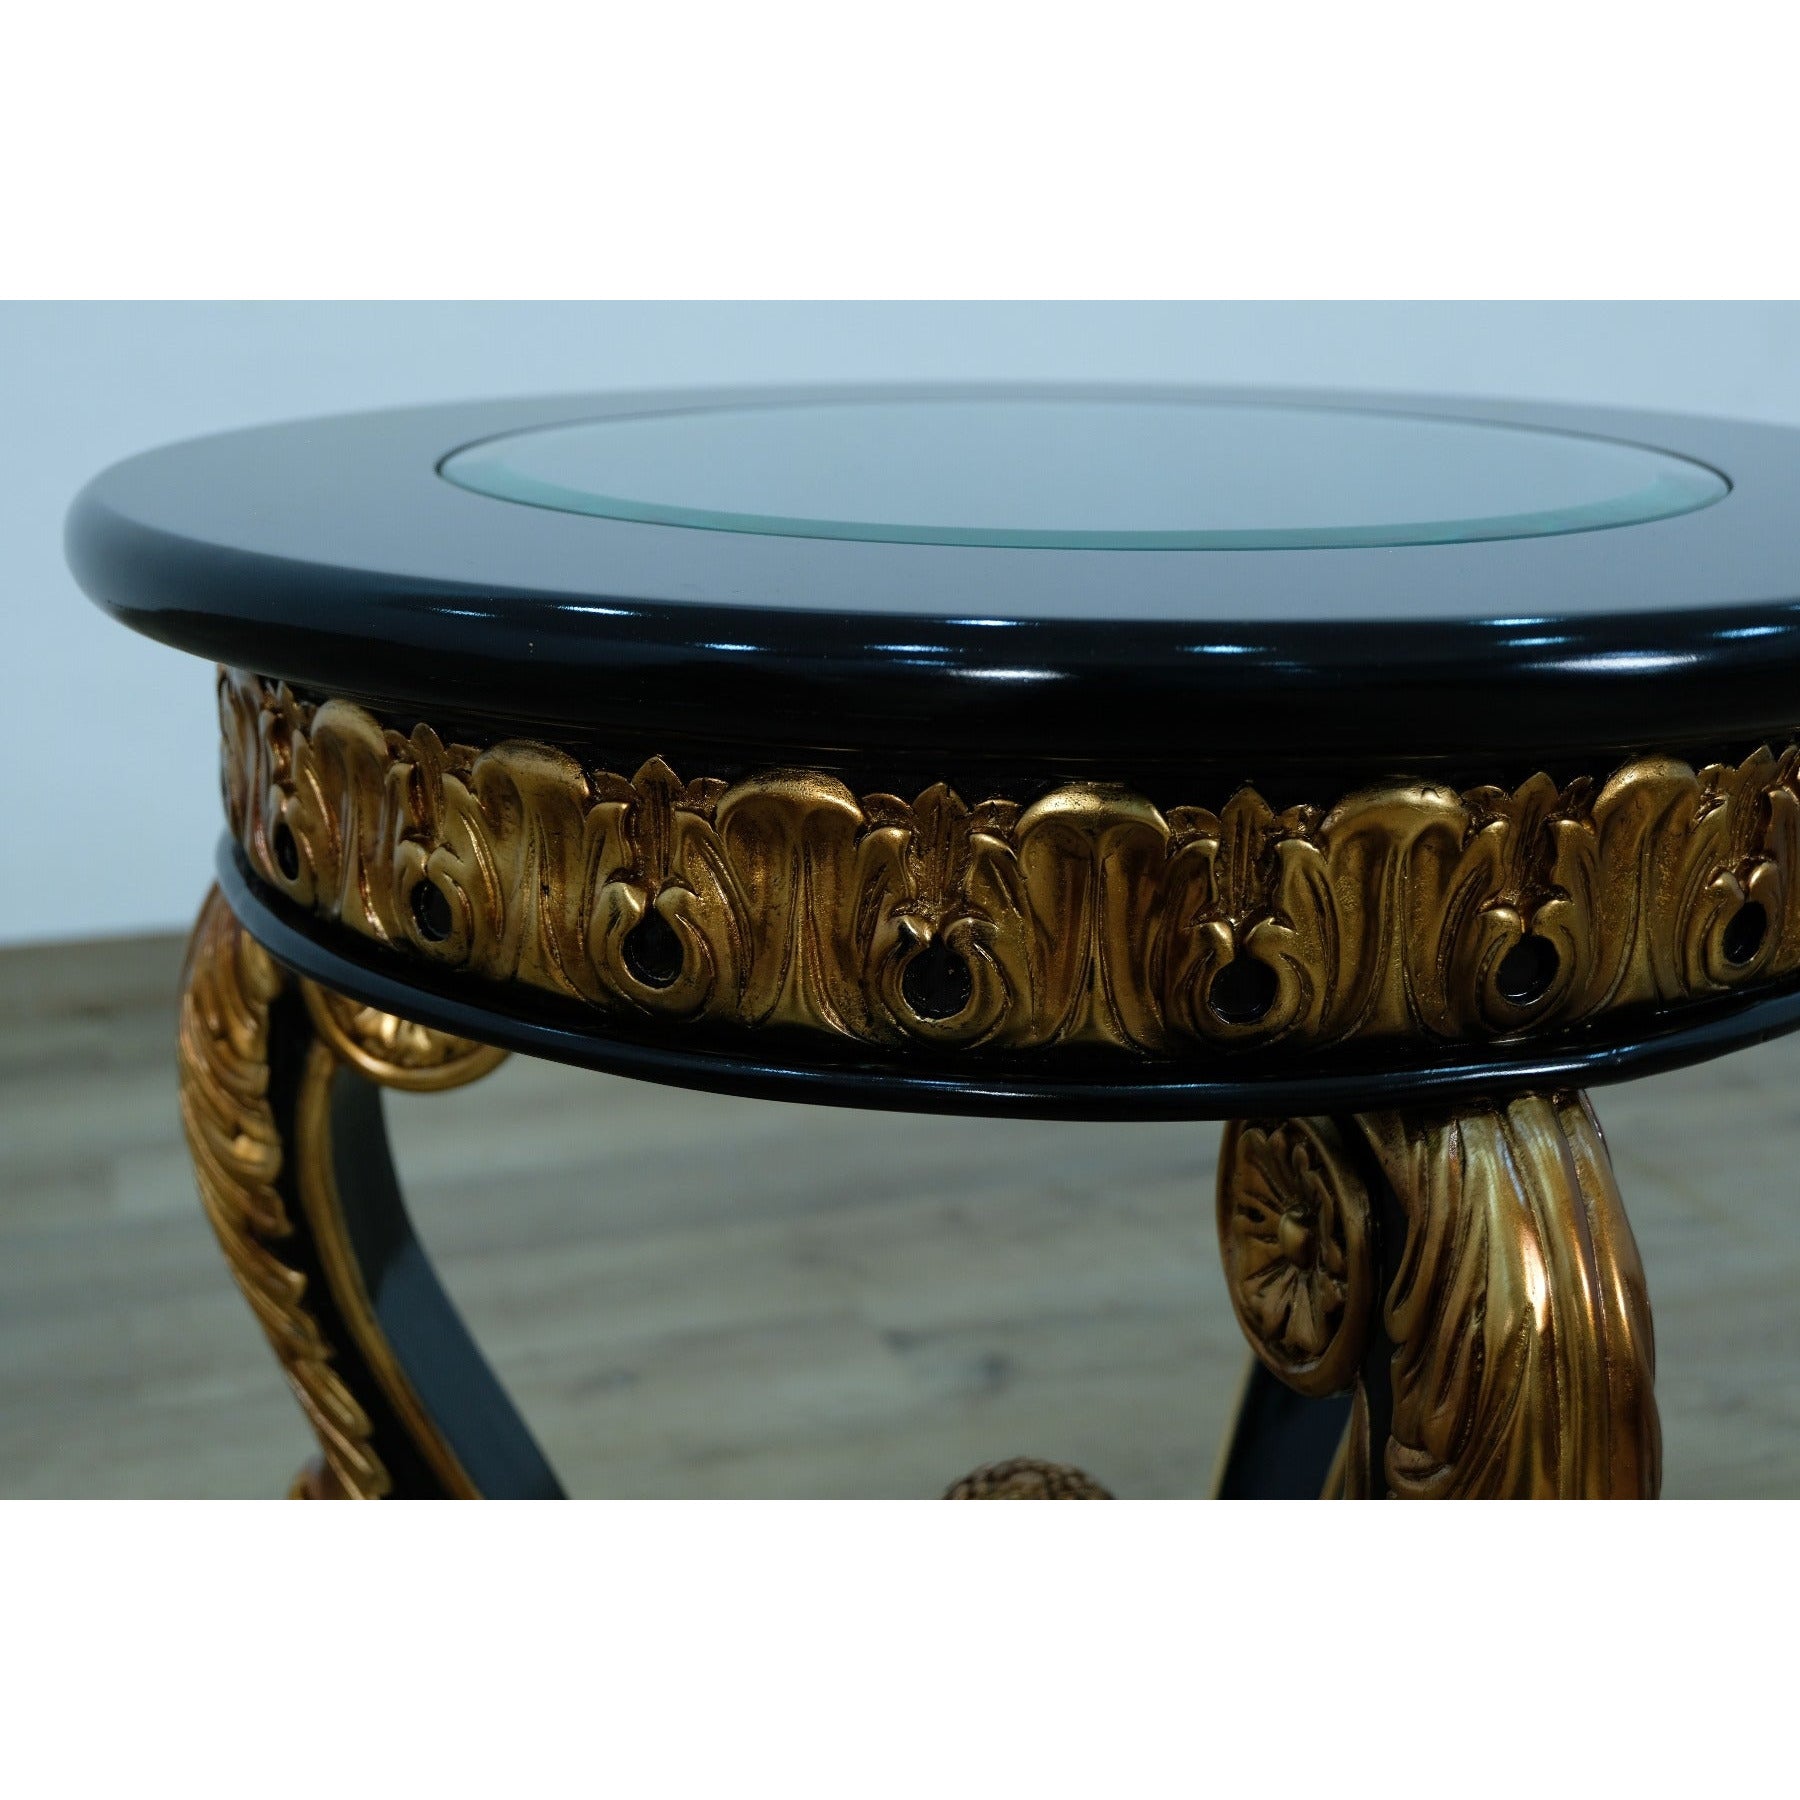 European Furniture - Bellagio III End Table in Black-Gold - 30019-ET - New Star Living